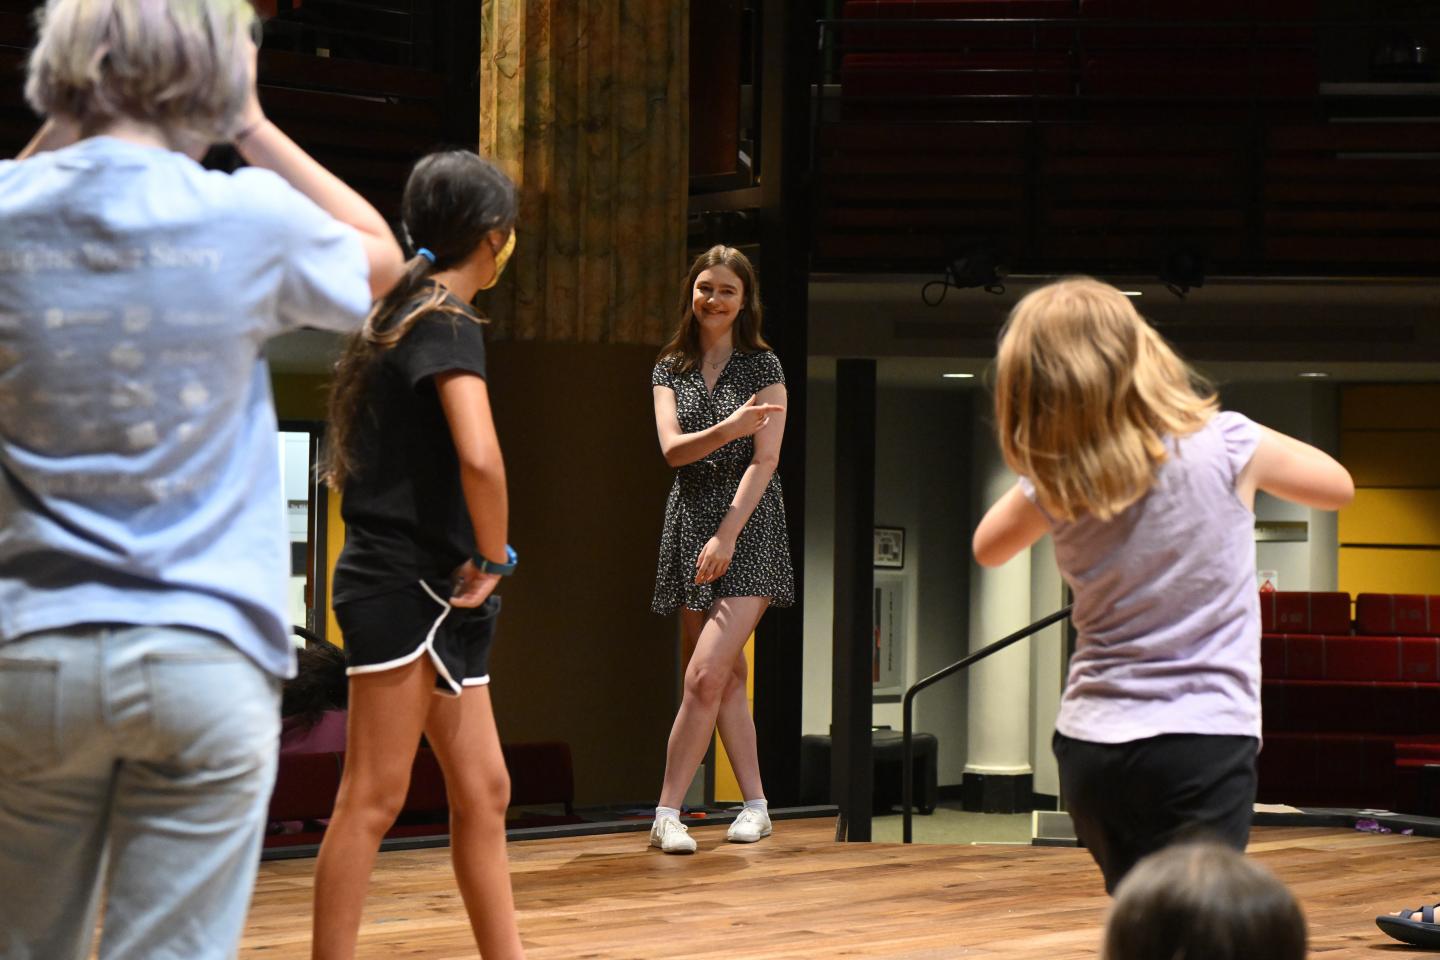 Johns Hopkins student Caroline Colvin stands on a stage with younger students